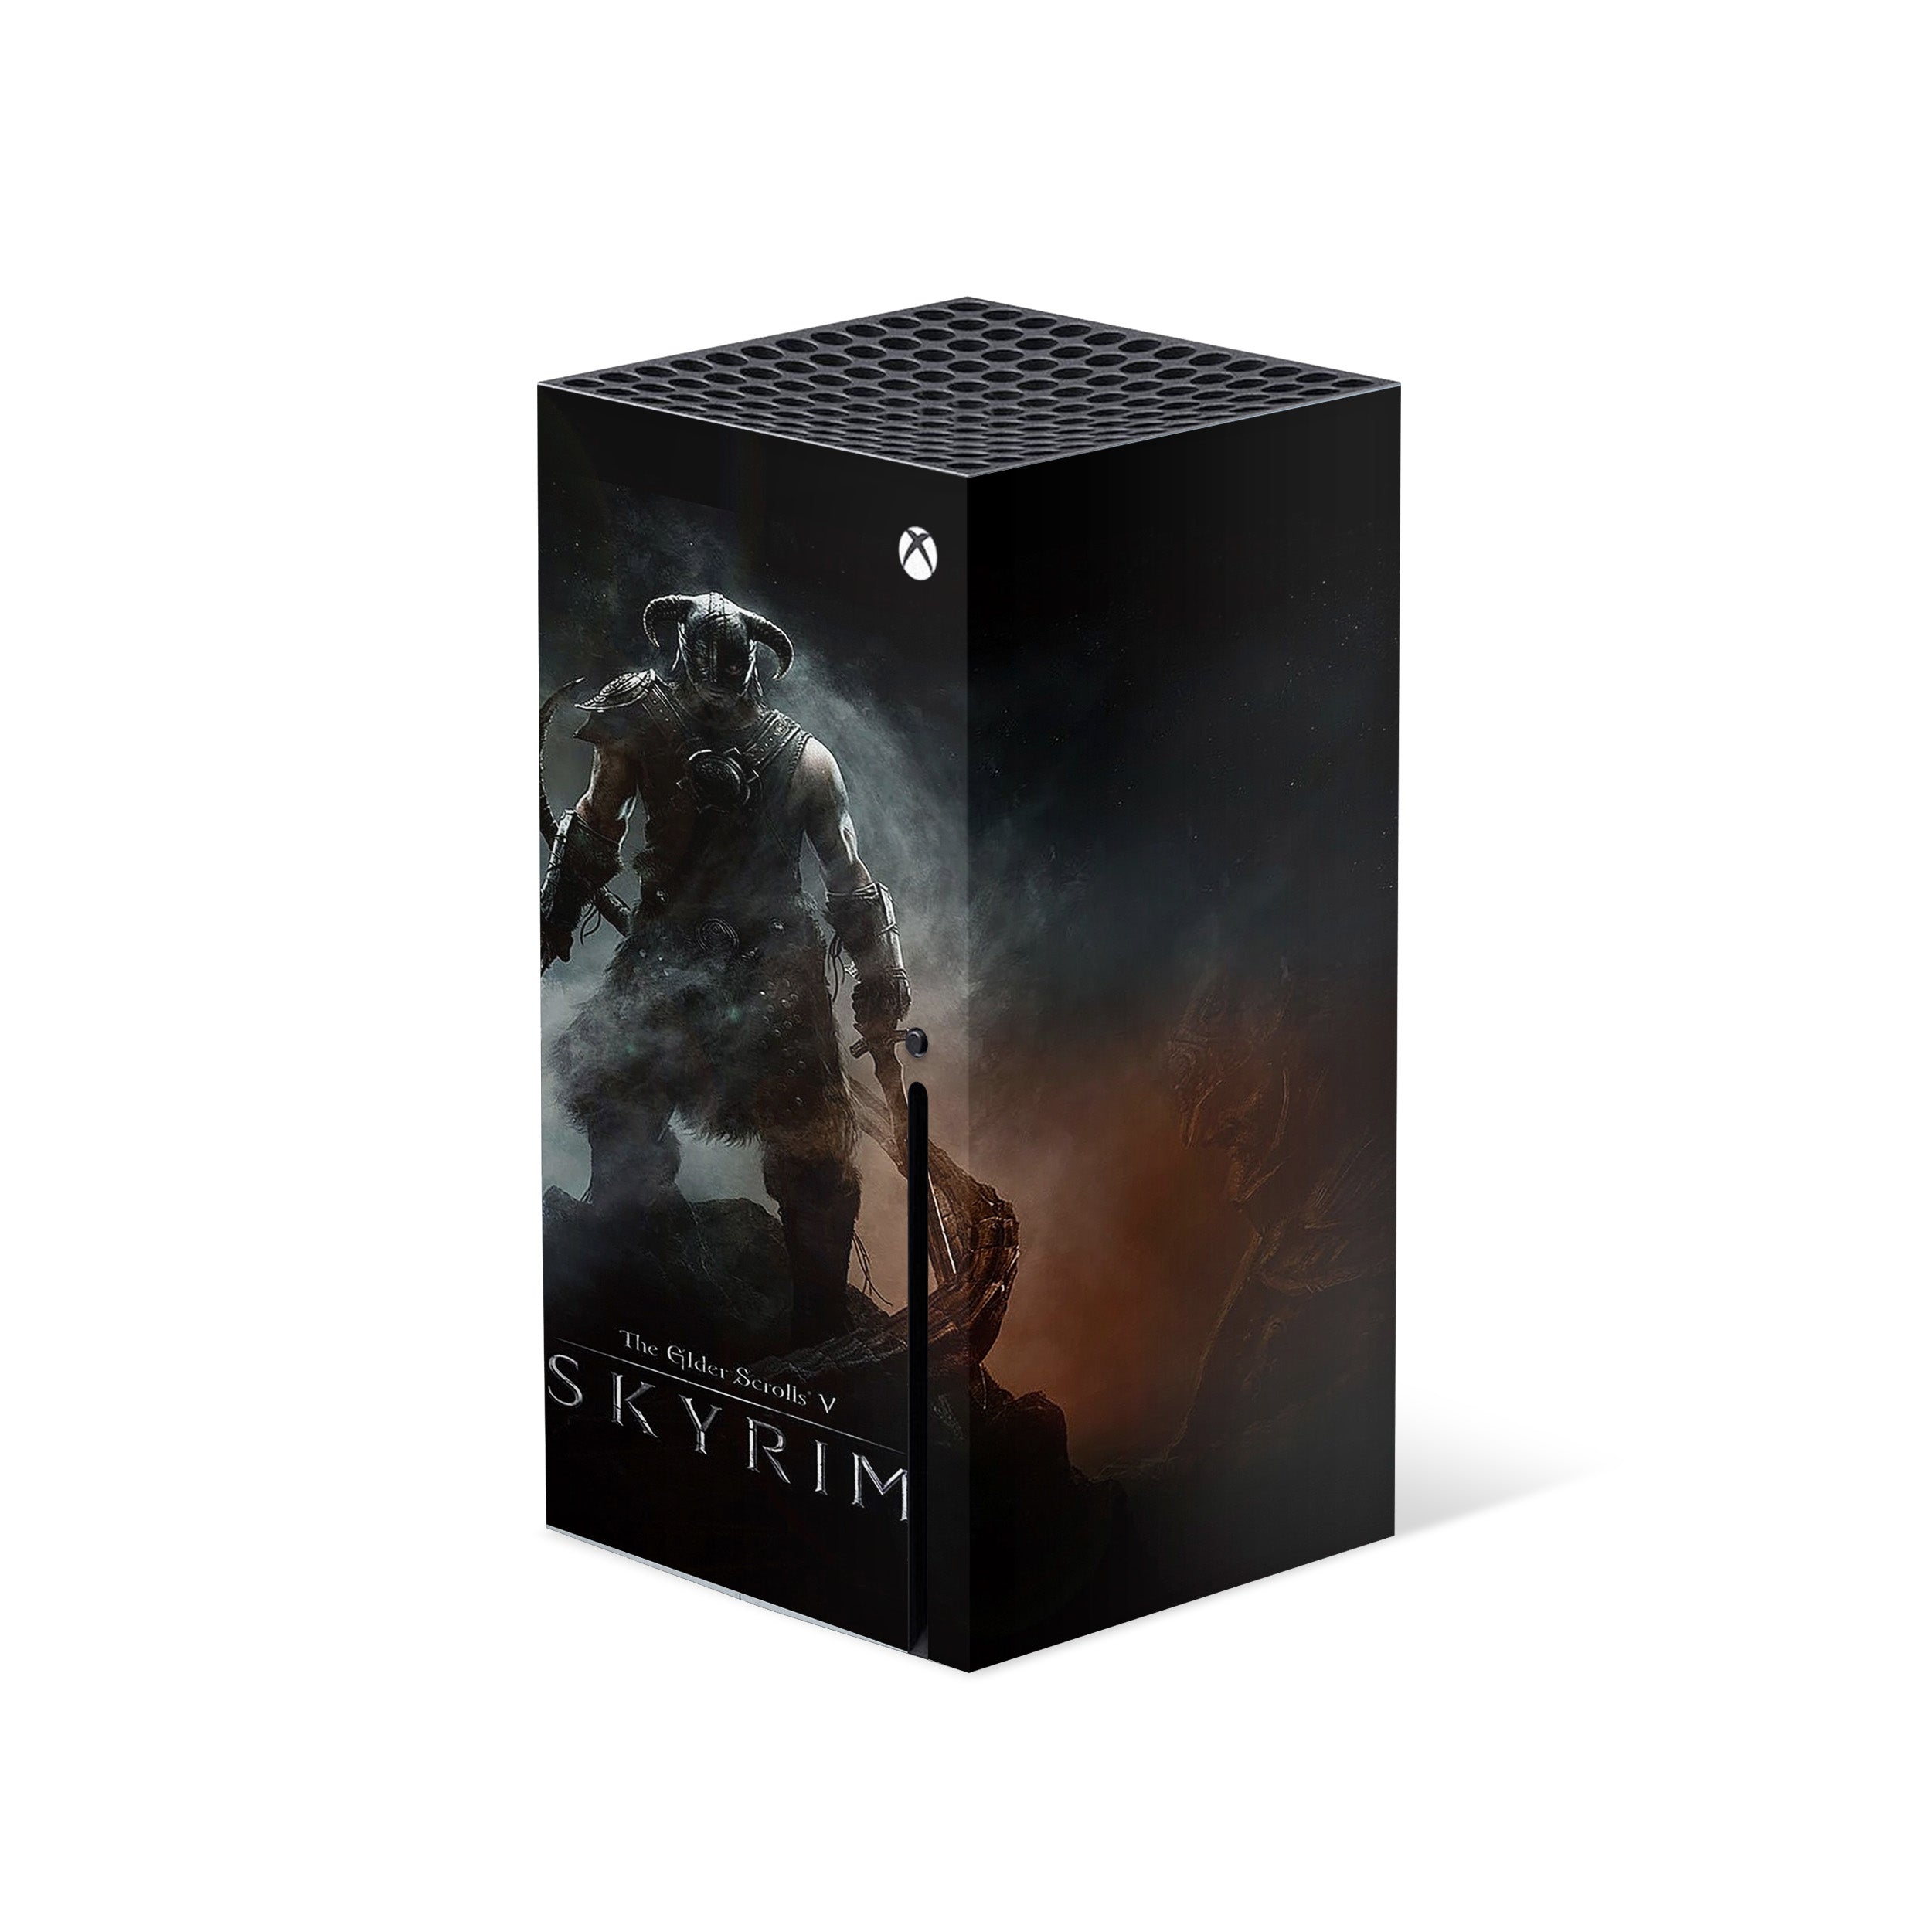 A video game skin featuring a The Elder Scrolls 4 Skyrim design for the Xbox Series X.